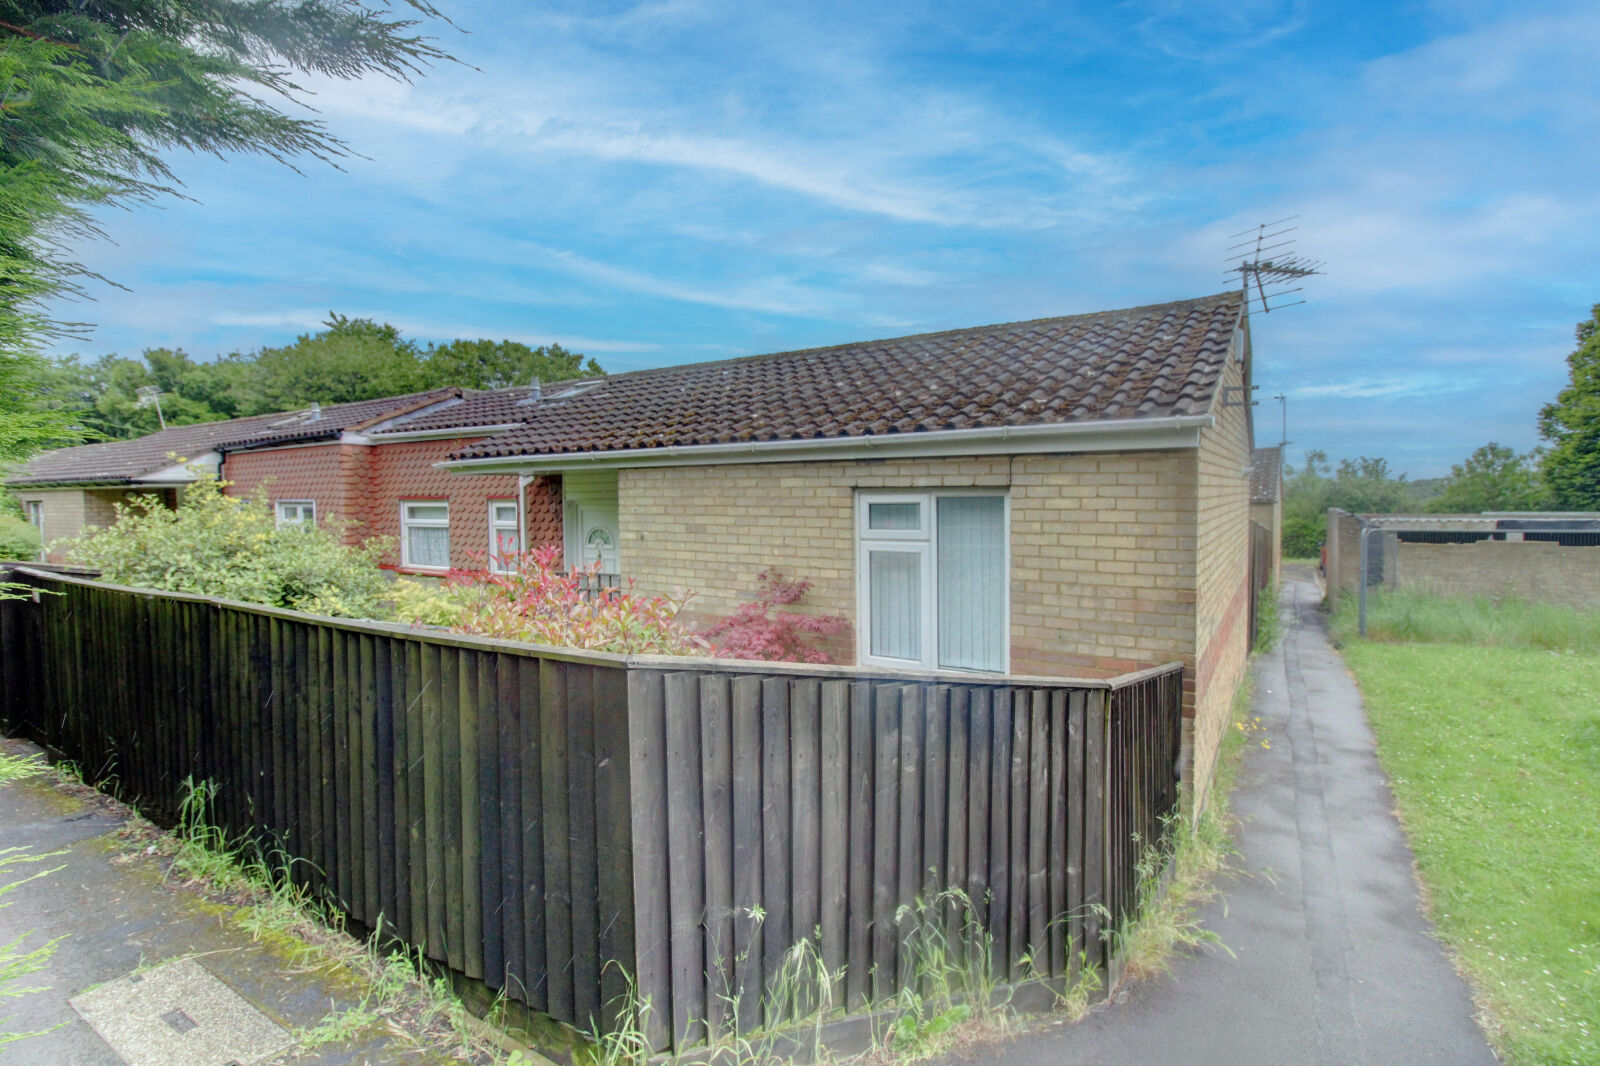 2 bedroom mid terraced bungalow for sale Harman Walk, High Wycombe, HP12, main image